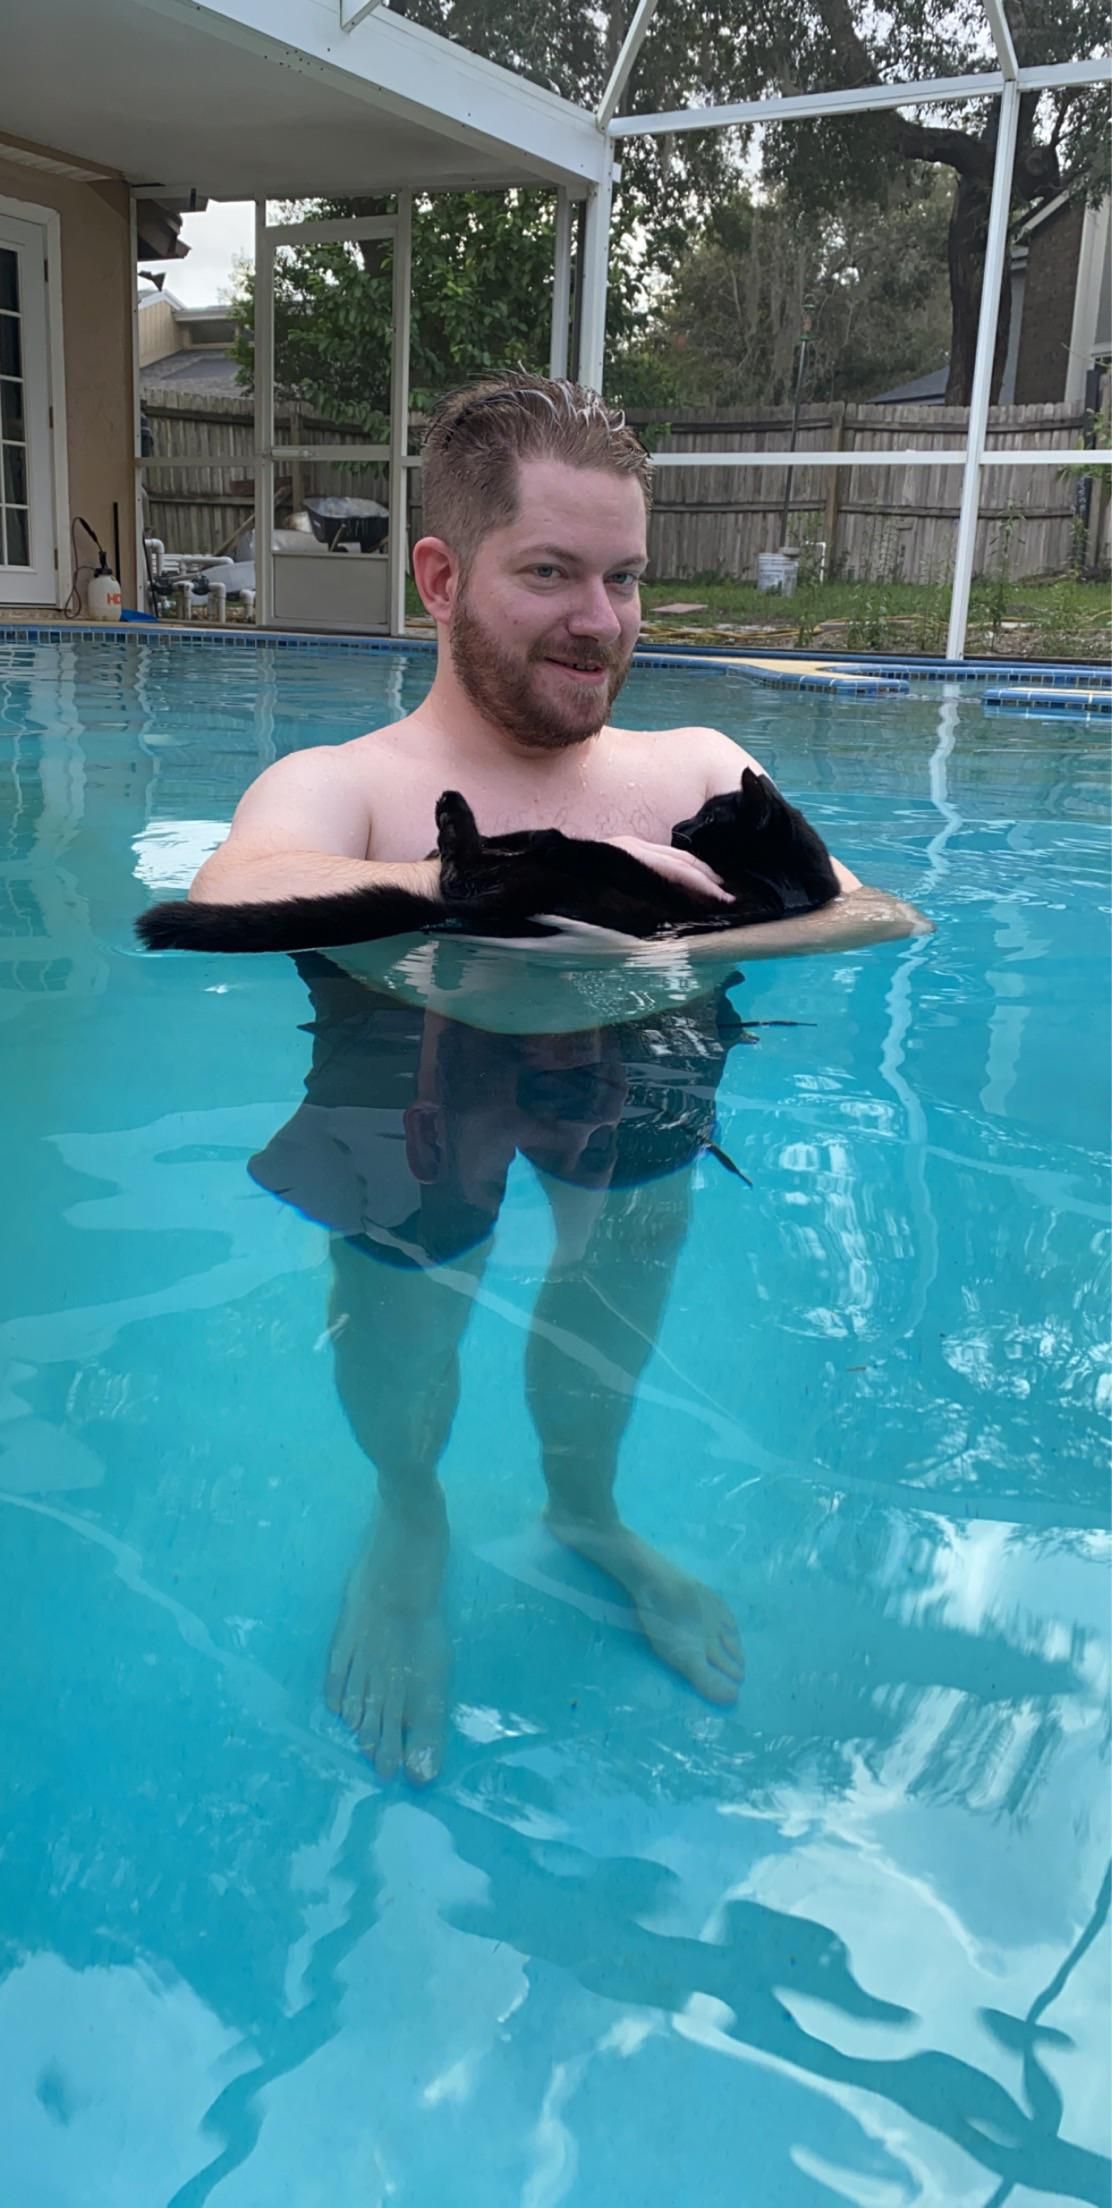 My boyfriend thought it would be funny to bring our cat into the pool. This picture is the result. Please enjoy.